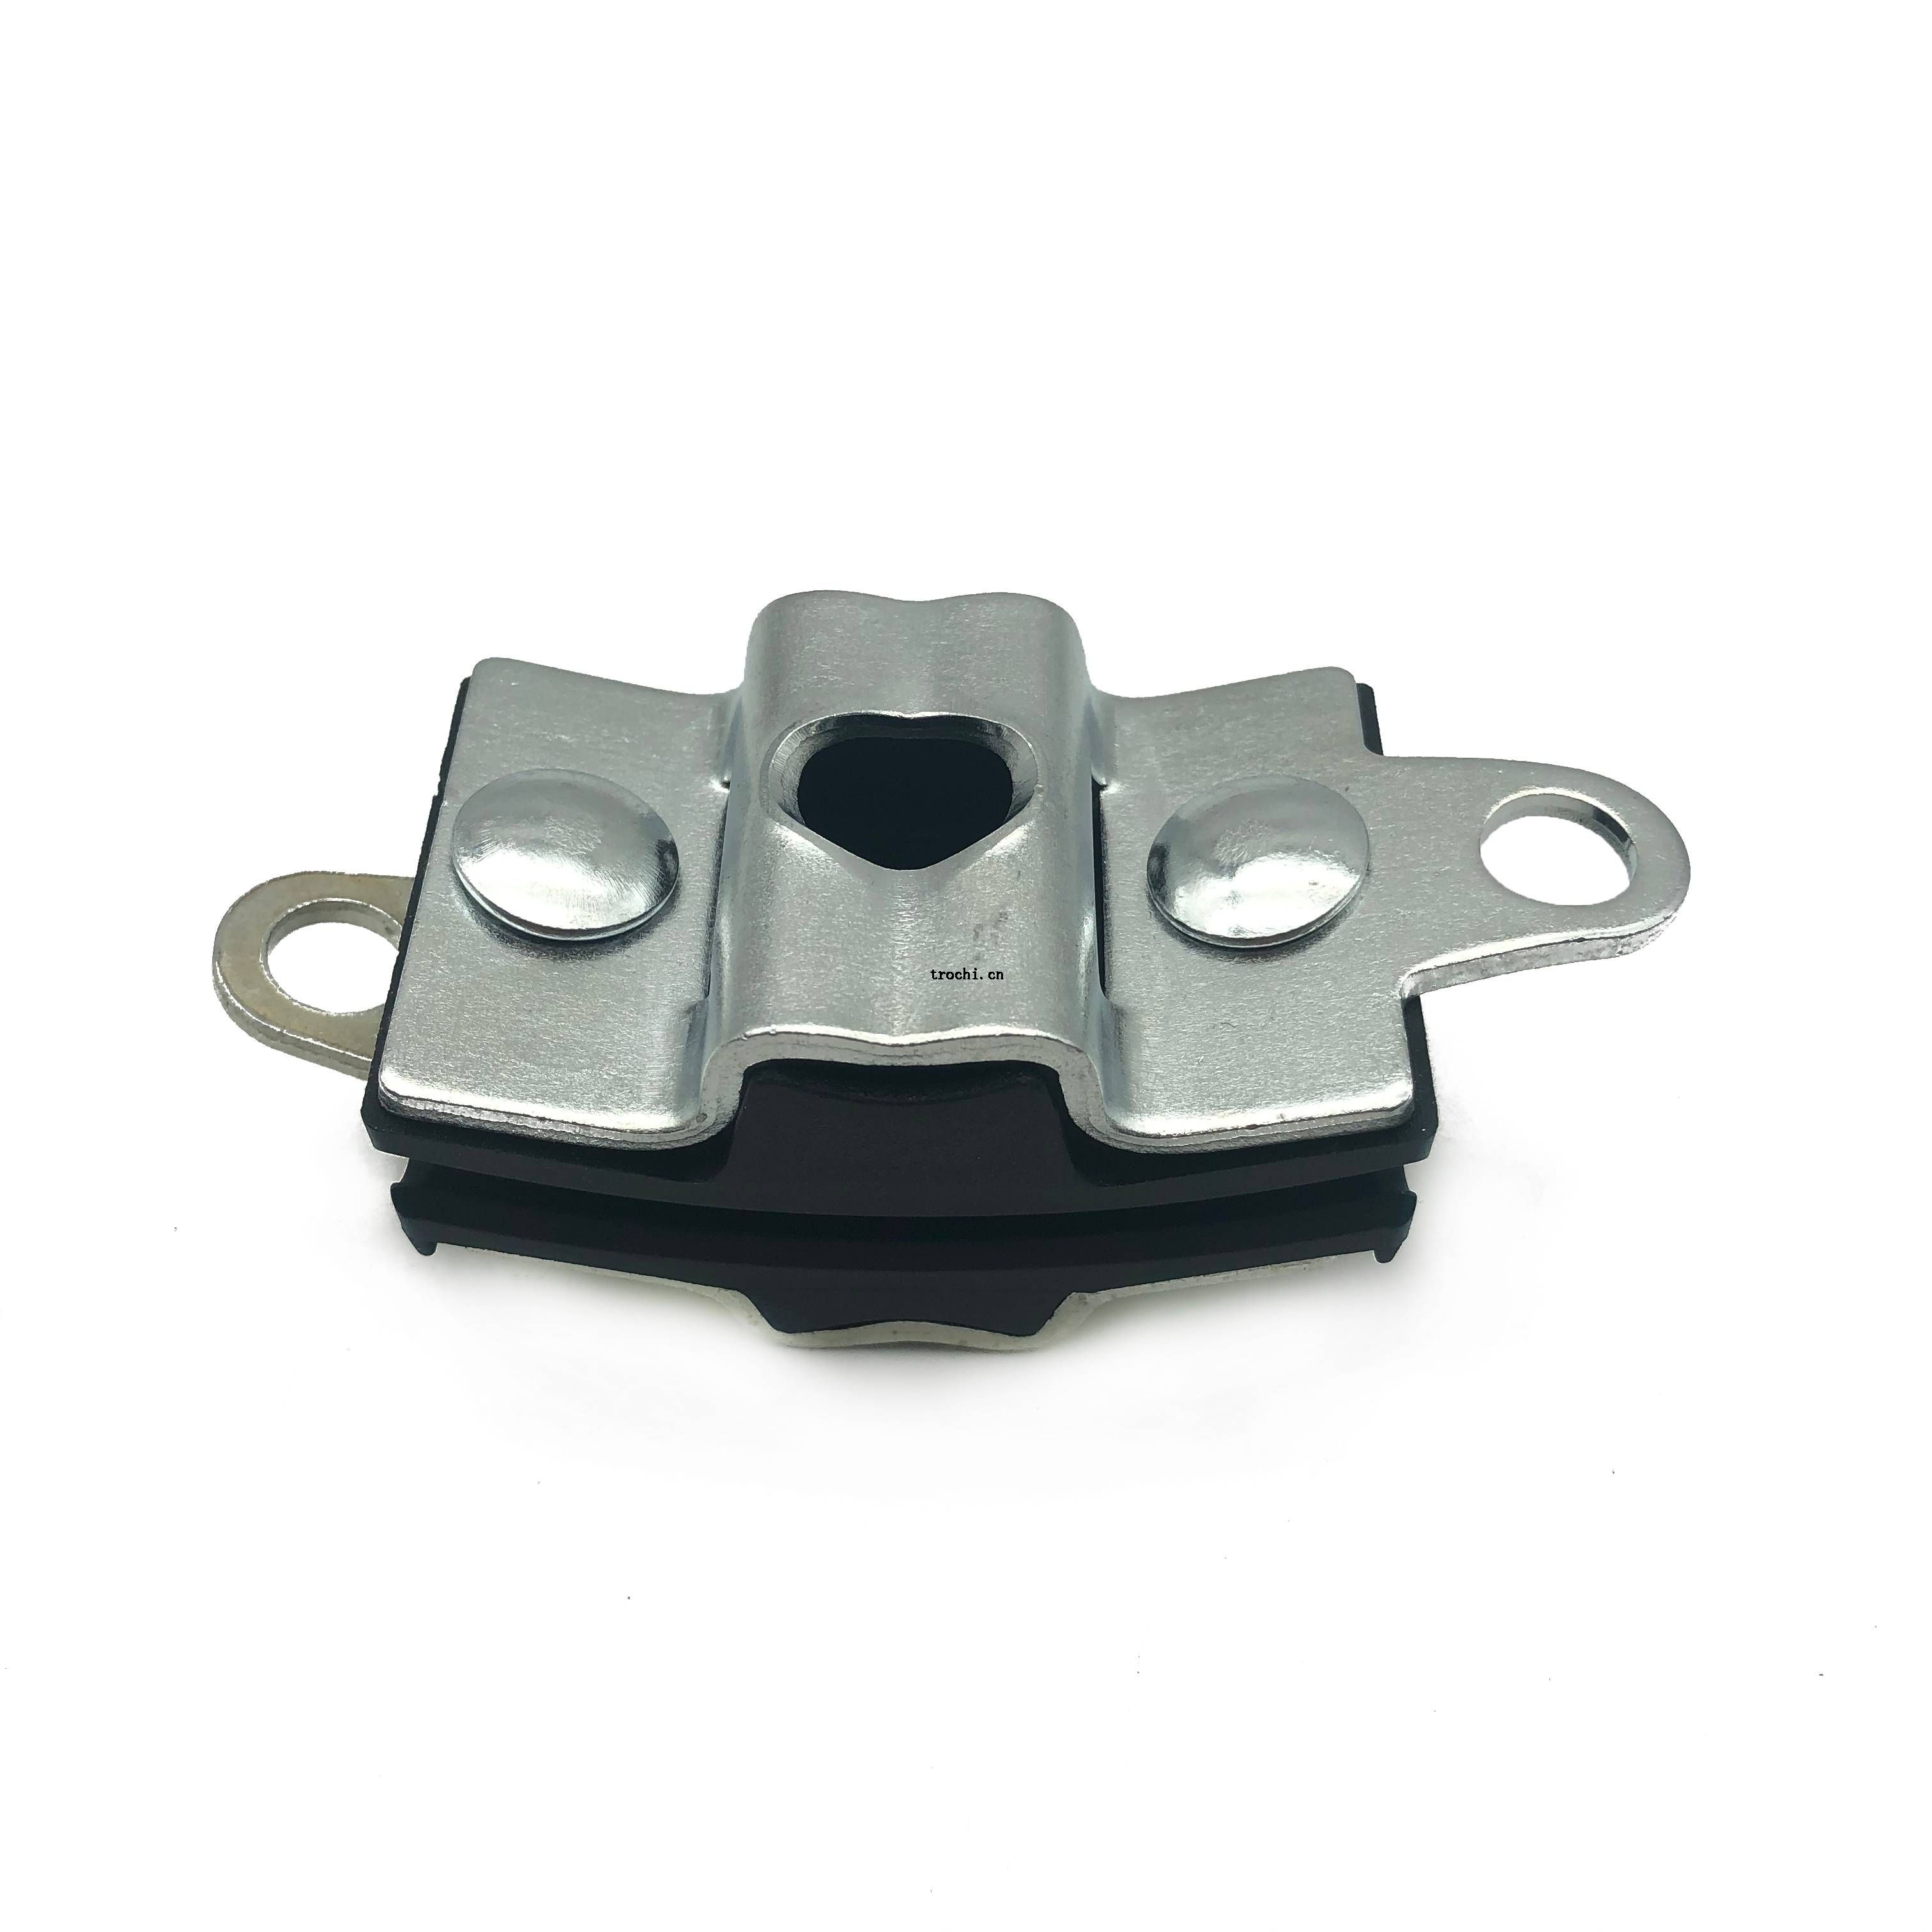 curved suspension clamp for figure-8 fiber optic cable